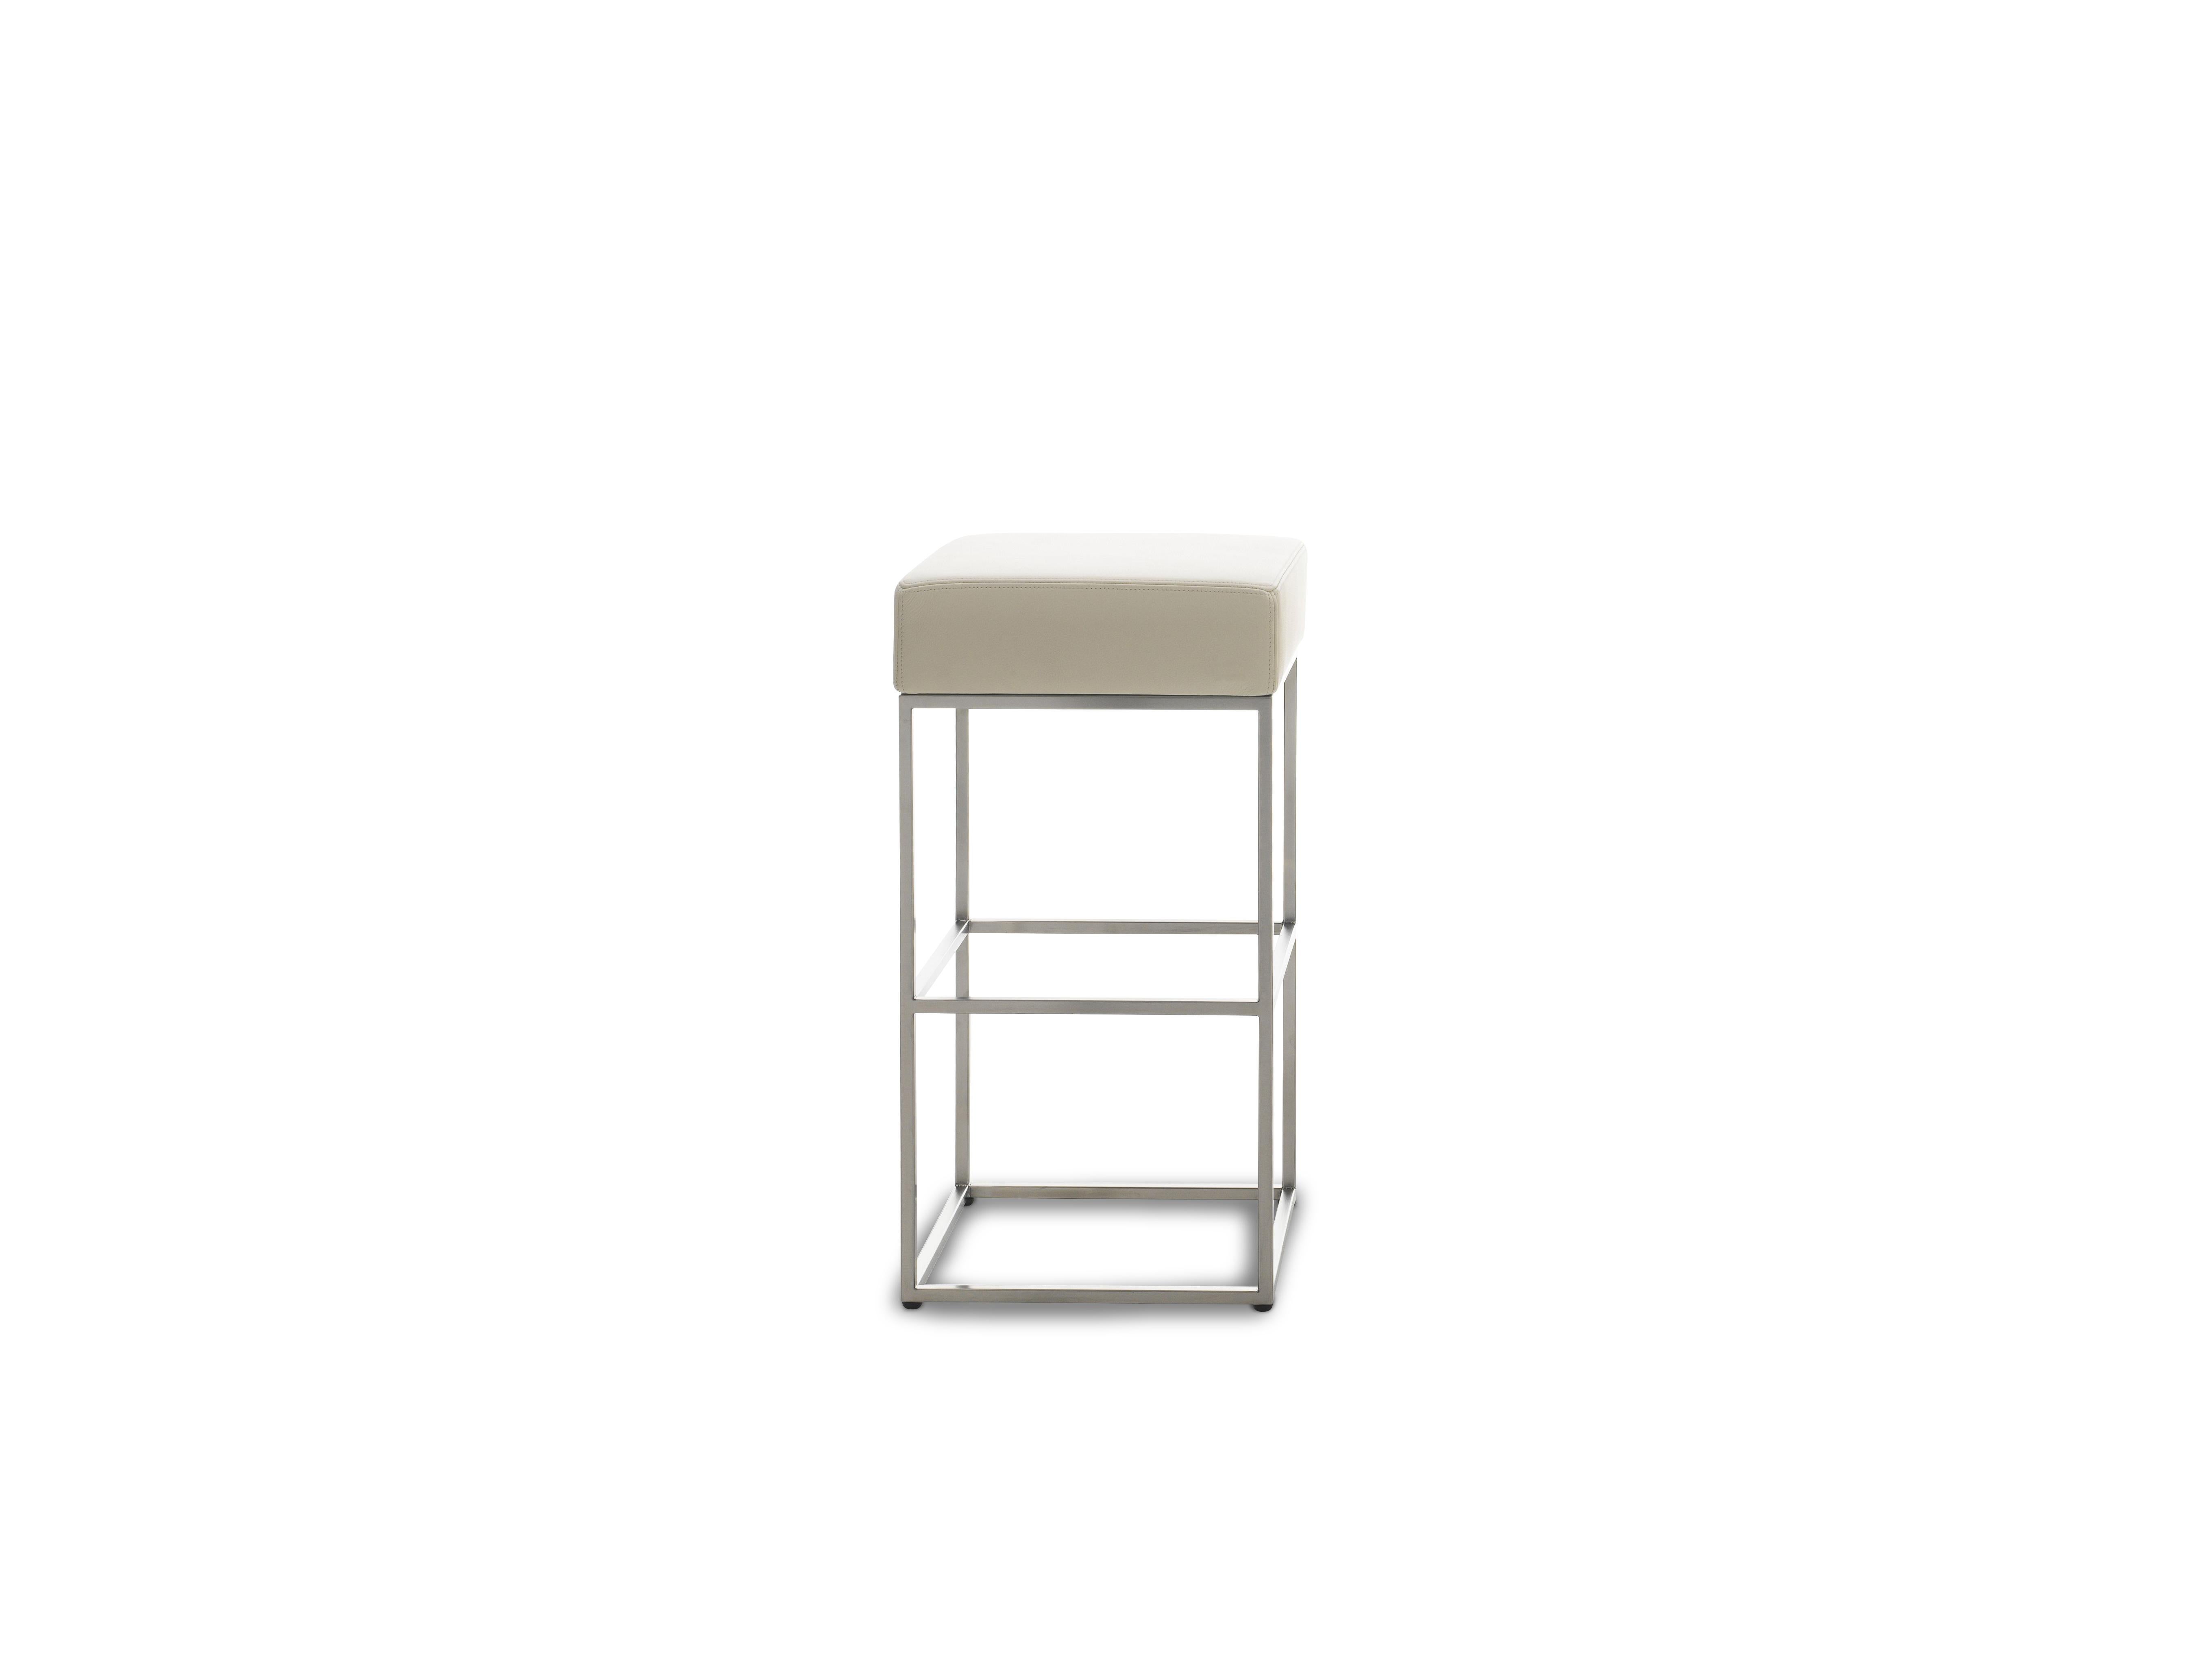 DS-218 stool by De Sede
Dimensions: D 38 x W 38 x H 77 cm
Materials: steel, leather

Prices may change according to the chosen materials and size. 

Plays a decisive role in moulding the character of a room. A focus on clear-cut structures,